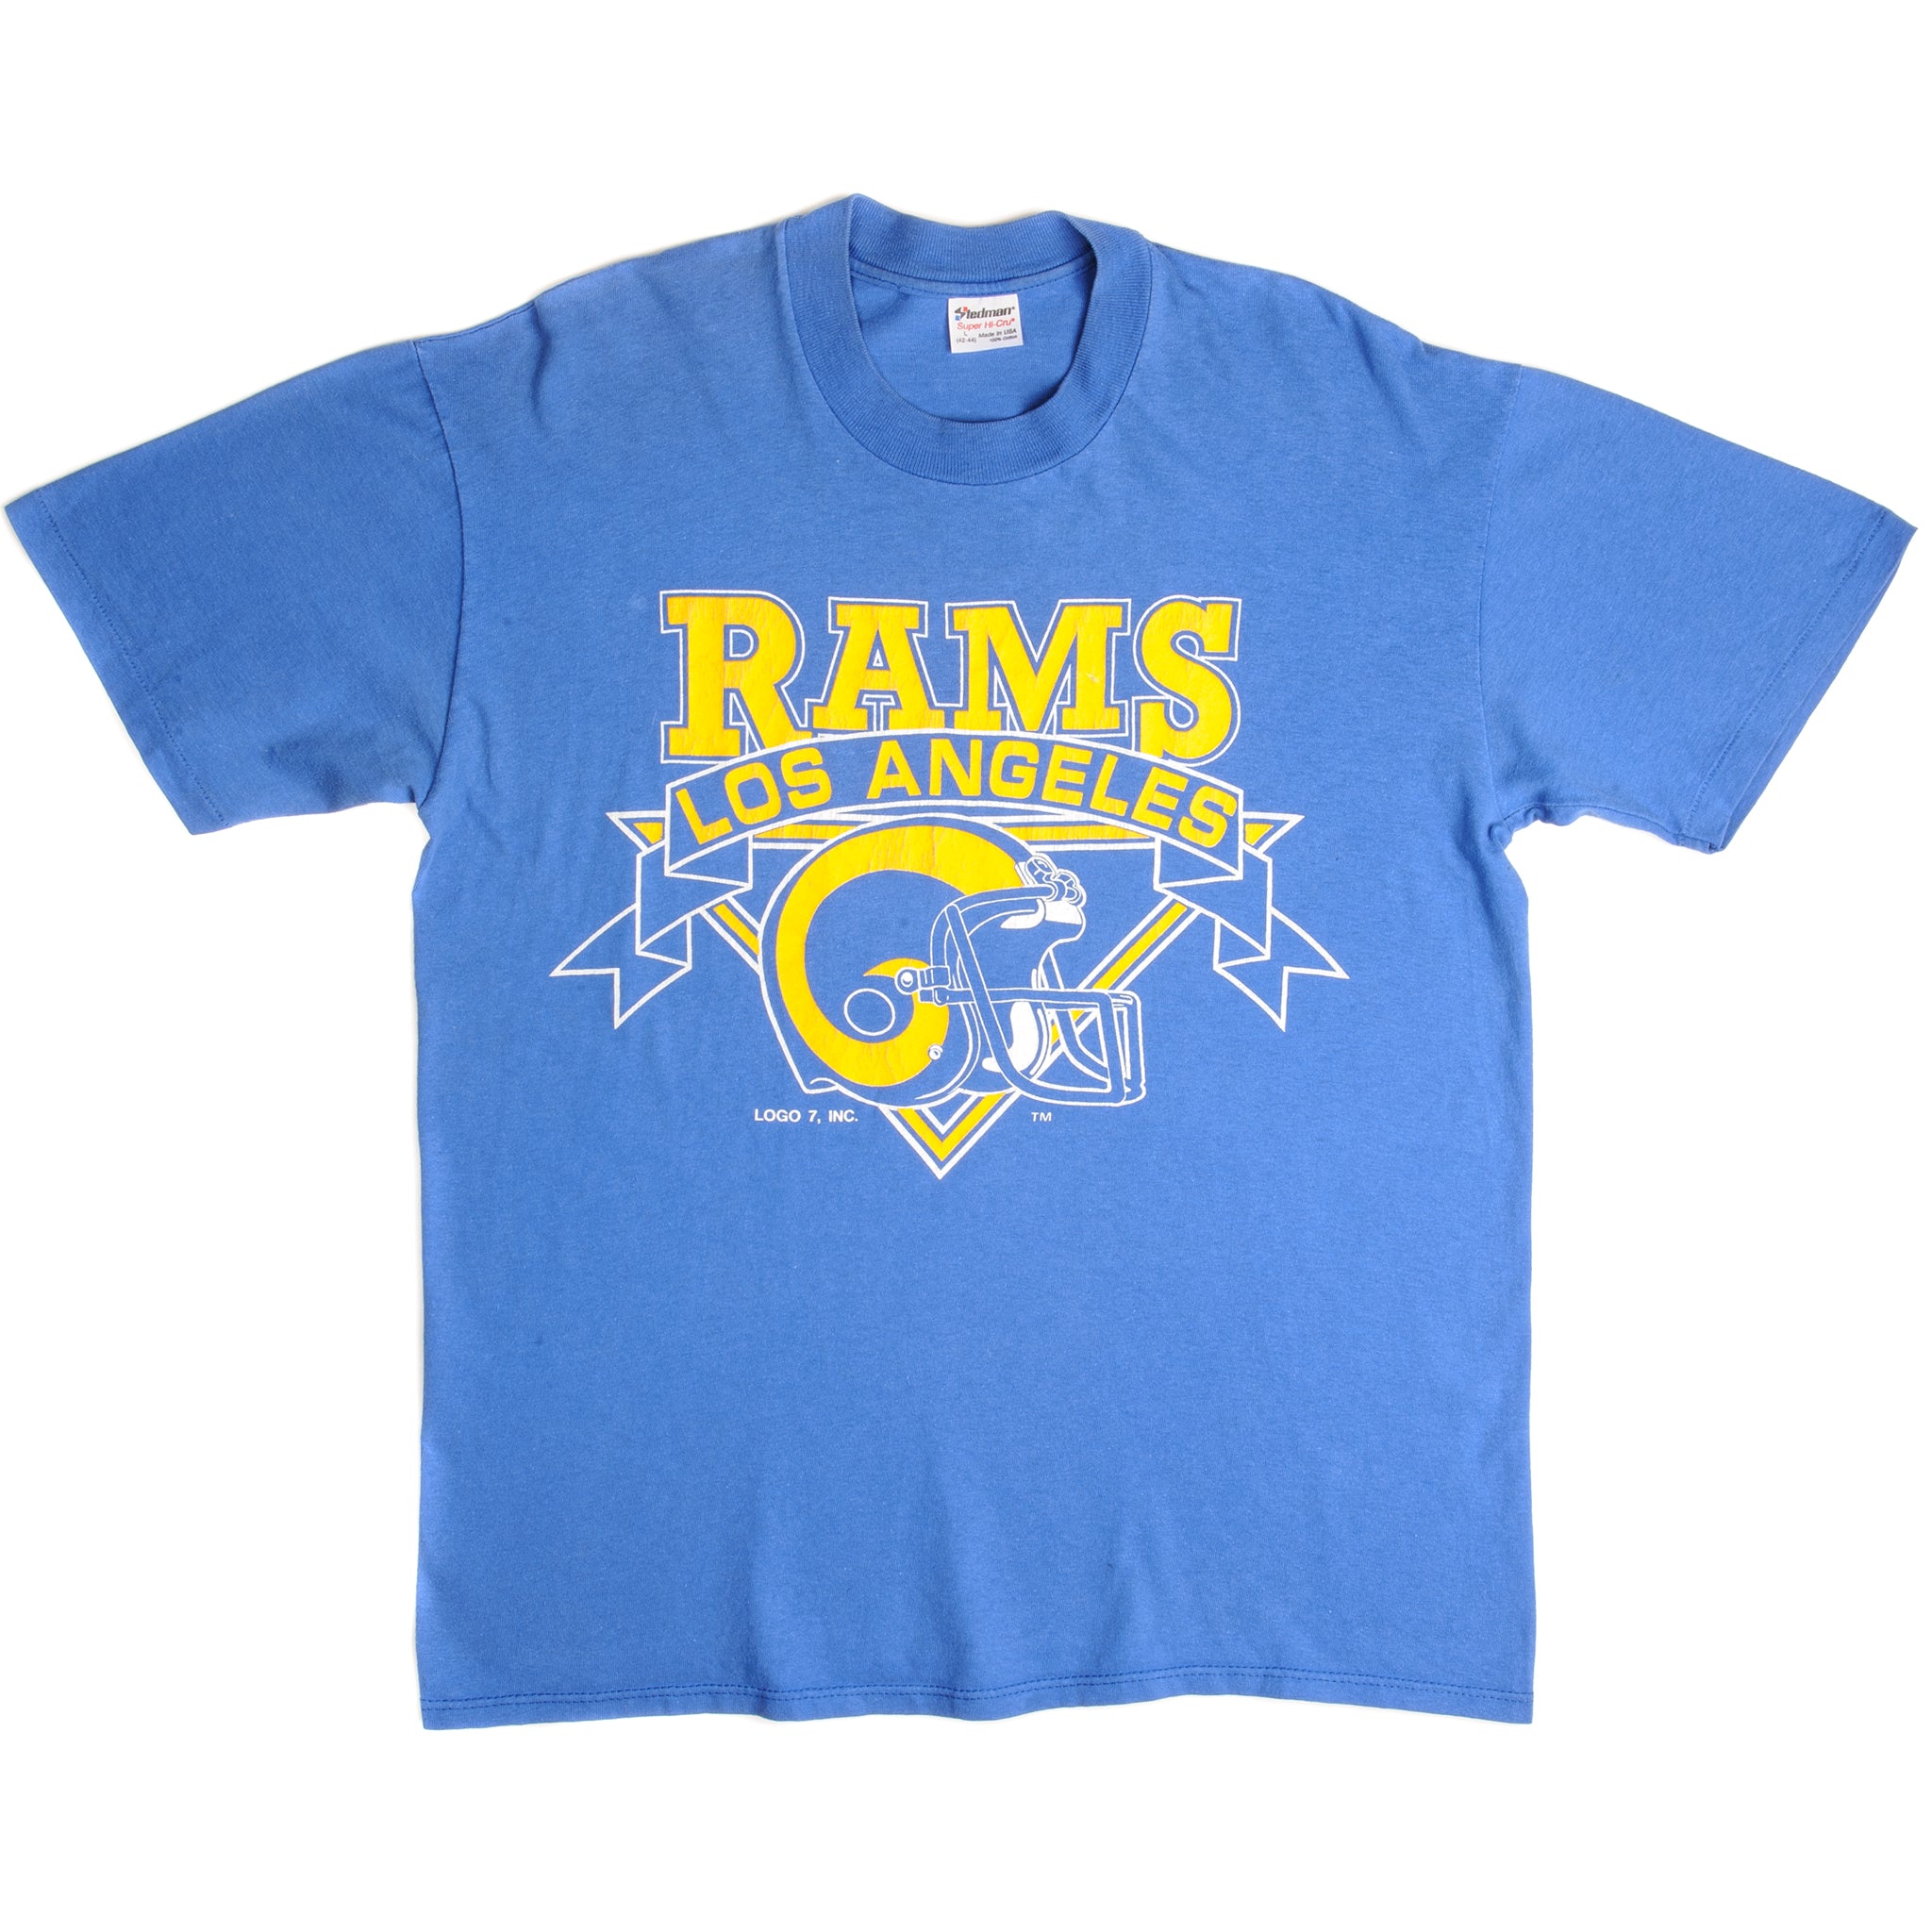 Vintage NFL Los Angeles Rams Tee Shirt Size Large Made in USA 1980s